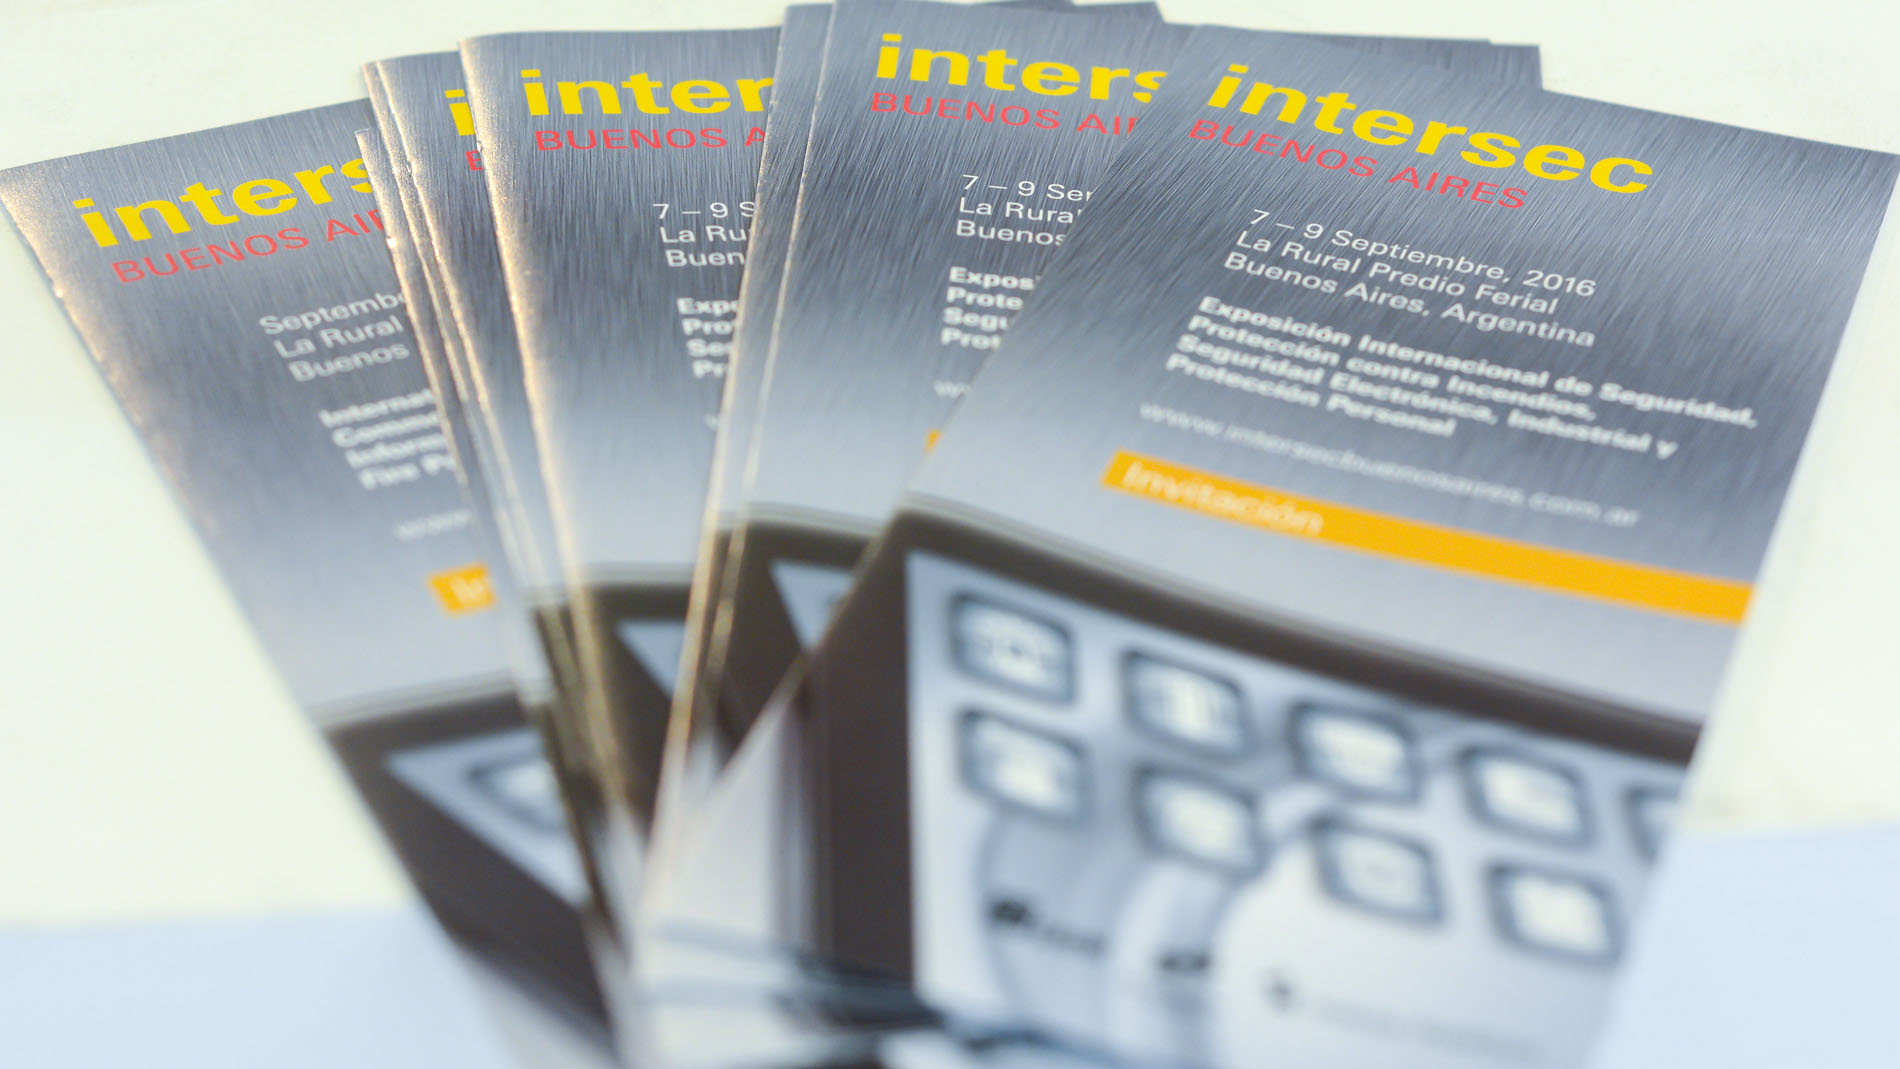 Intersec Buenos Aires: Promotional material